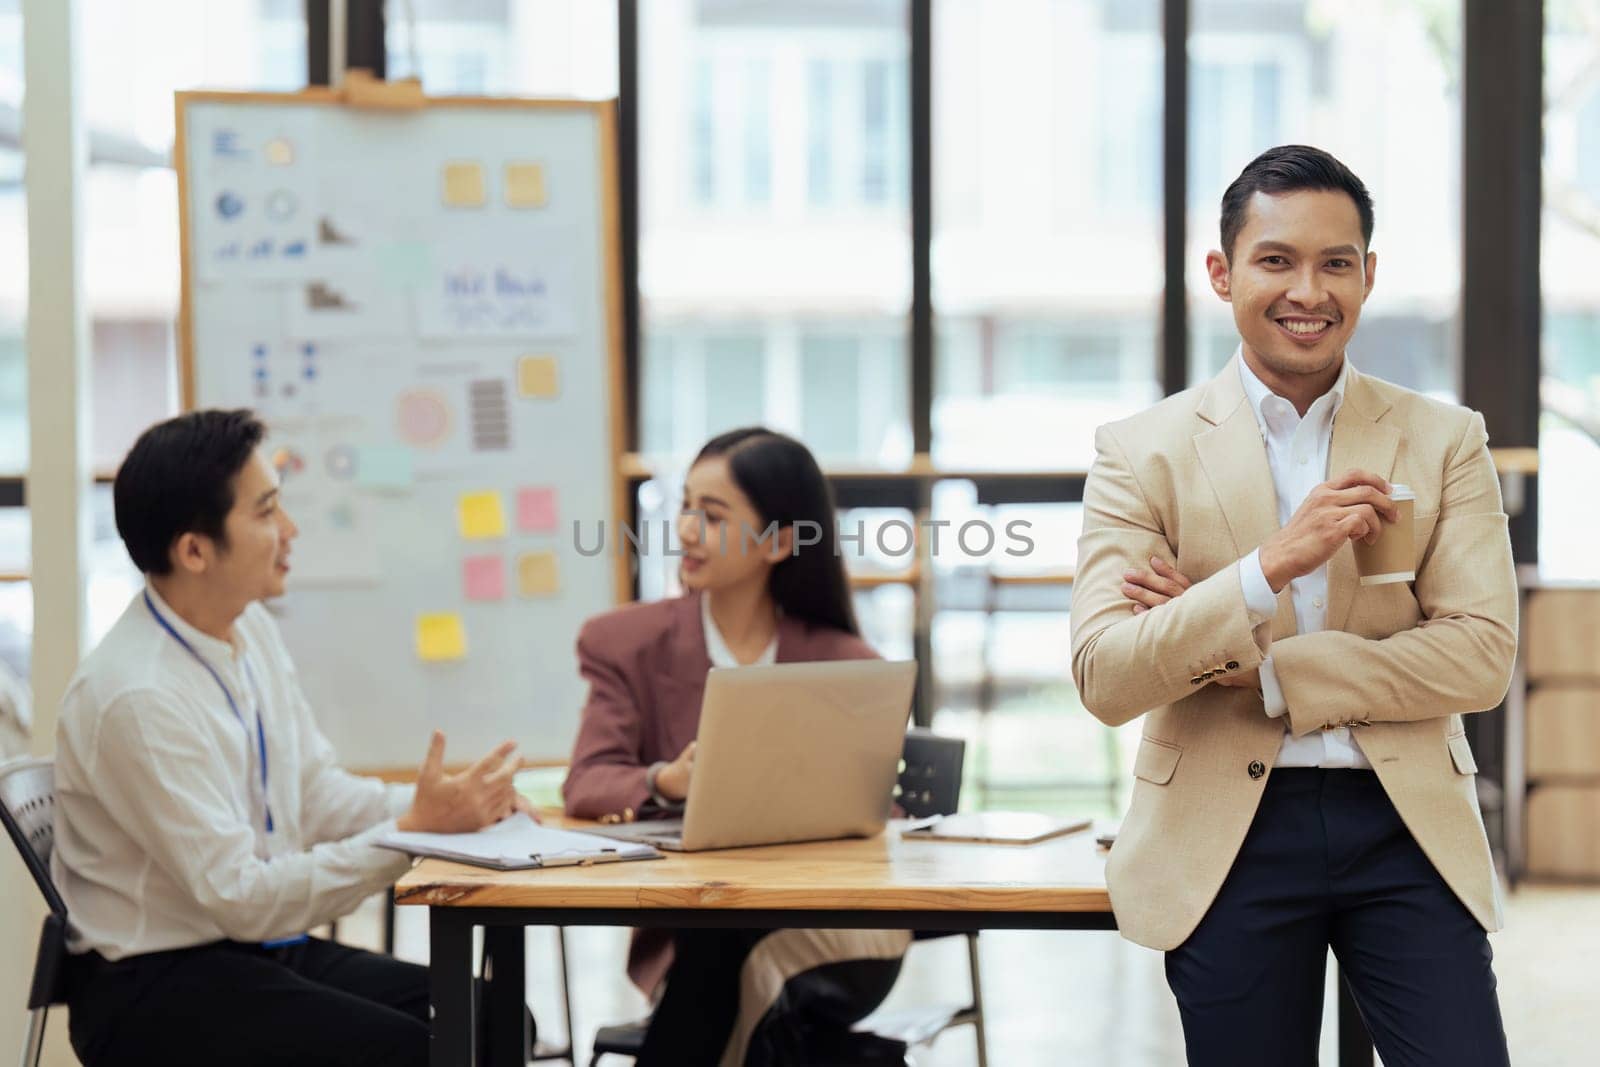 Portrait of happy and confident young man against background of his business team colleagues.